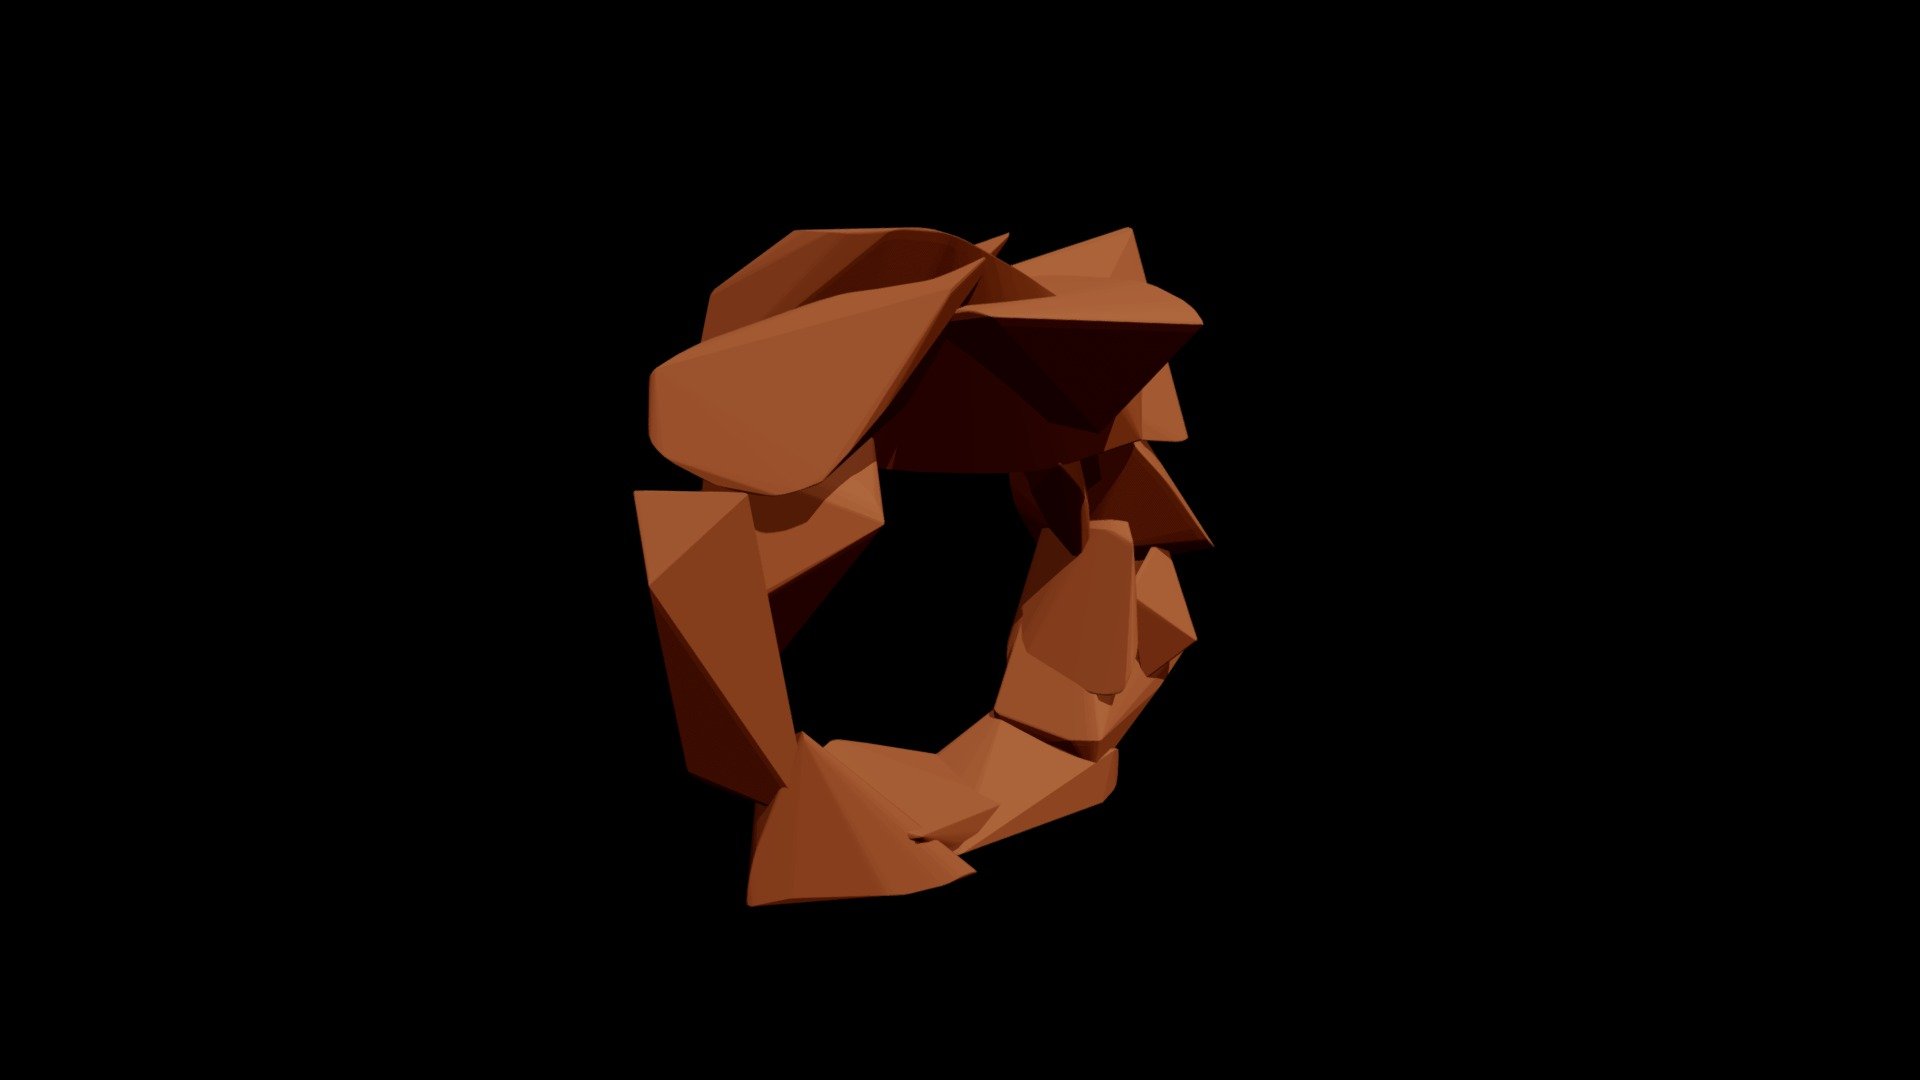 RING - asembled polygons